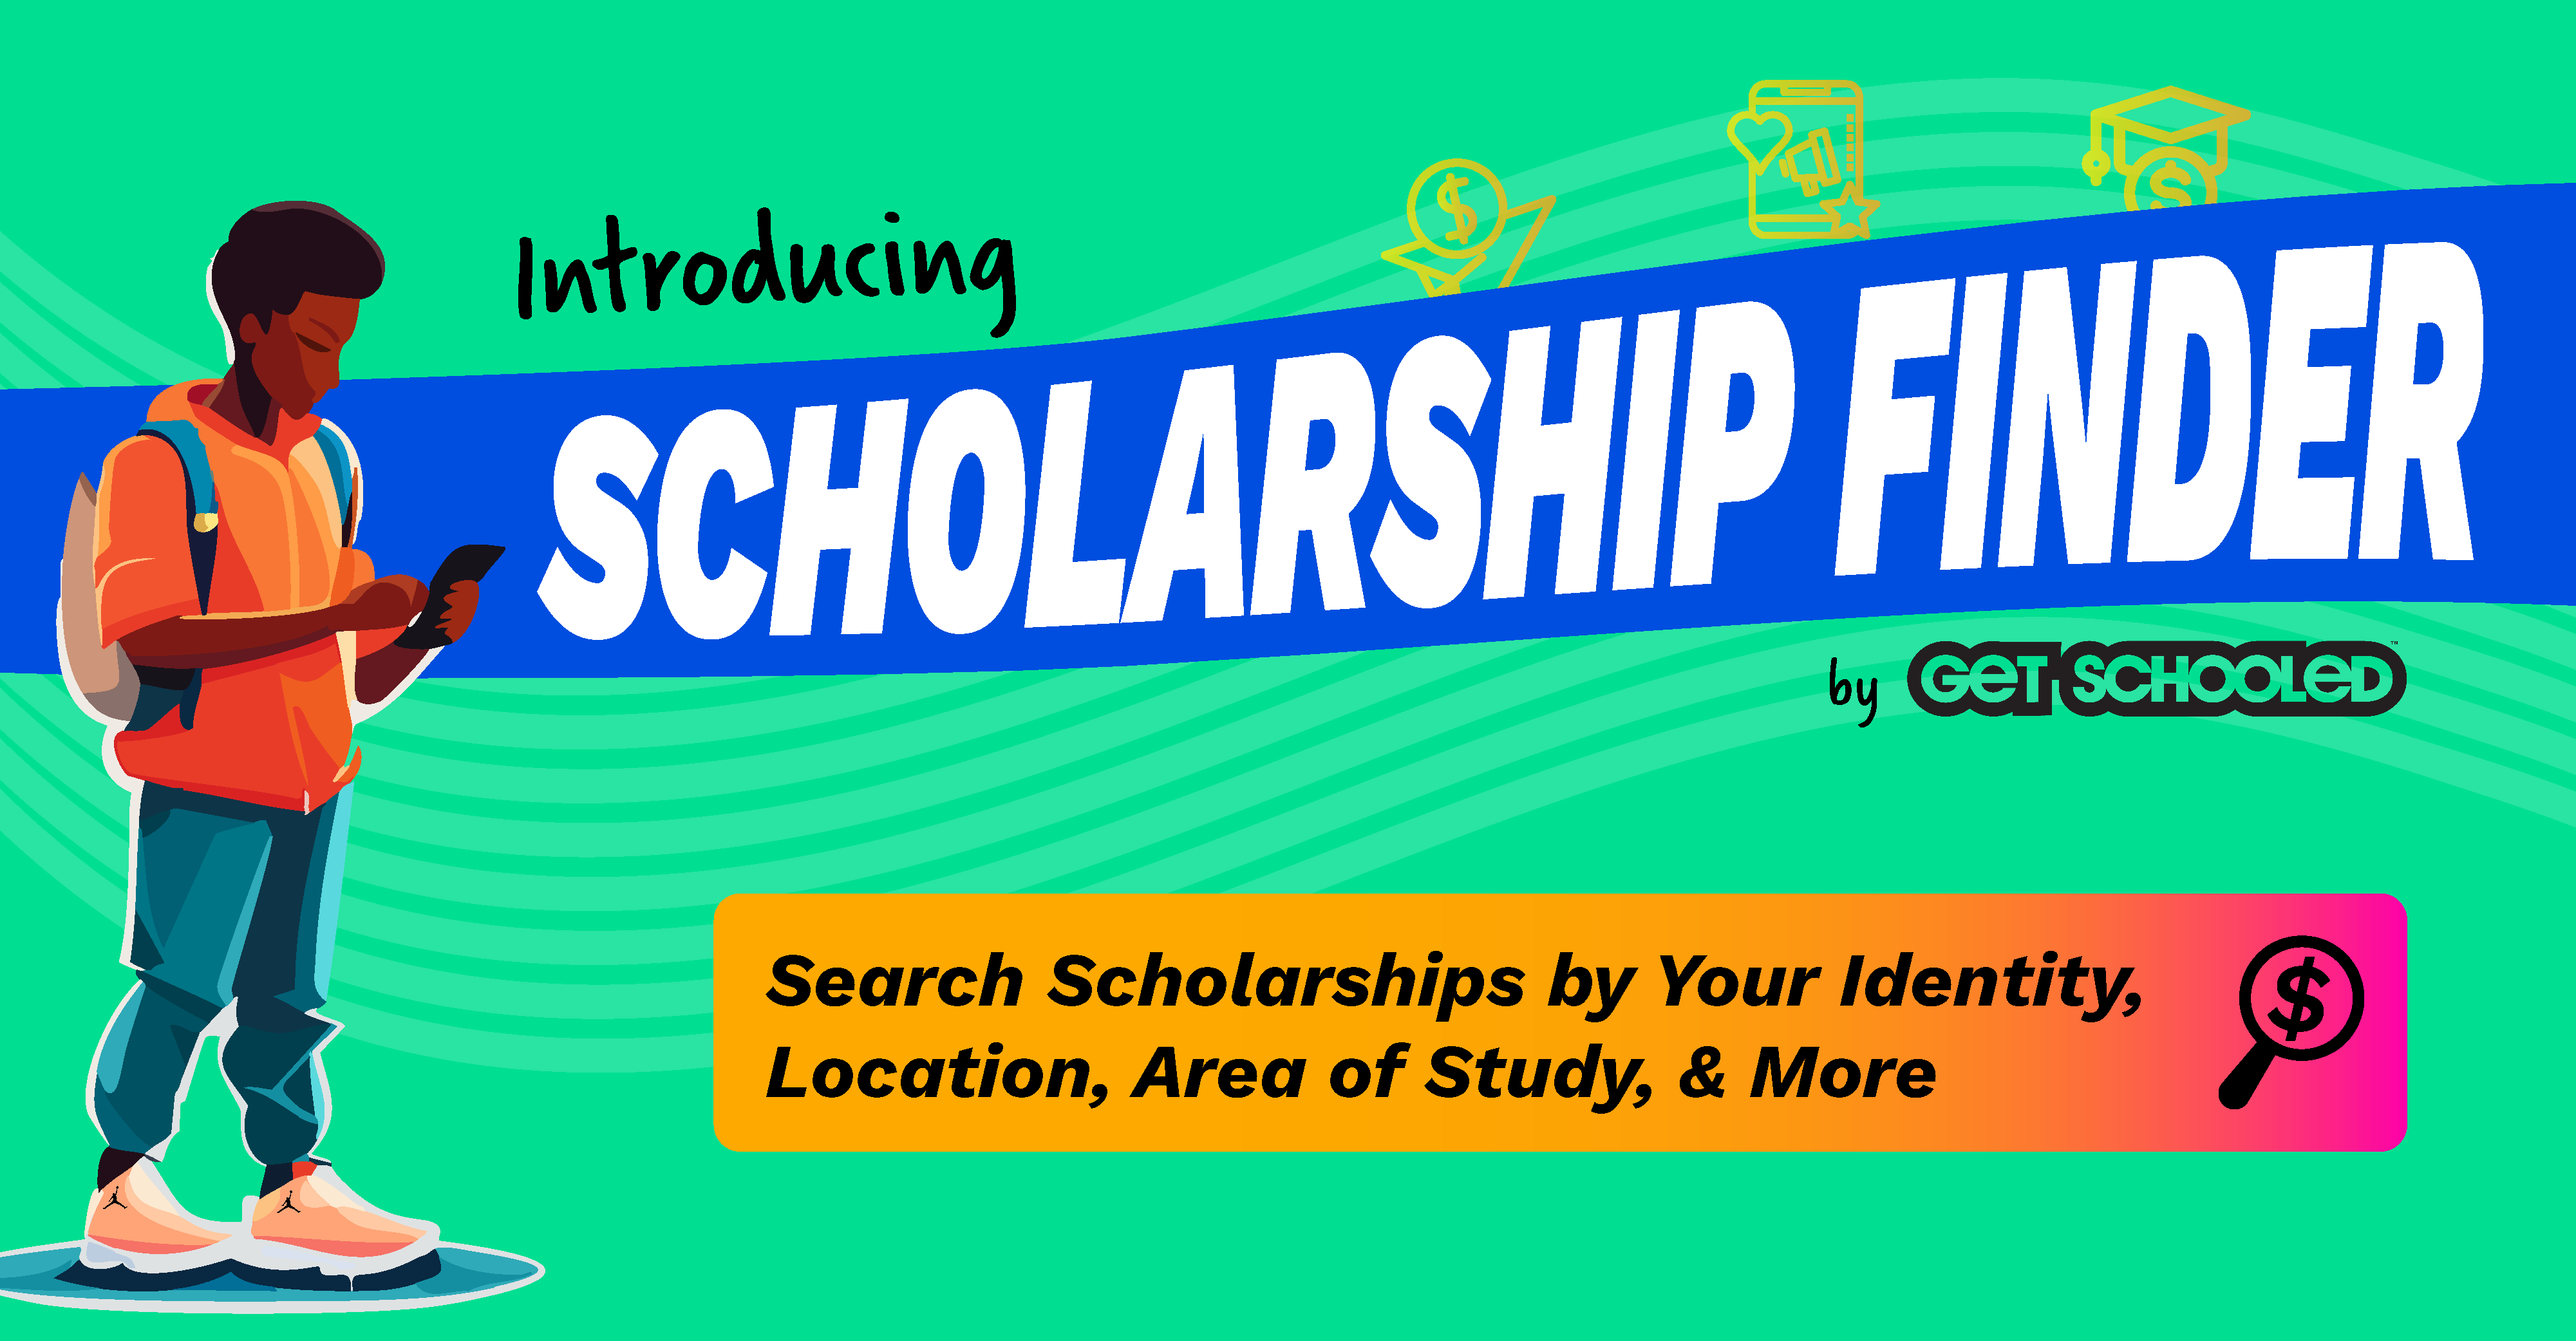 Illustration of a student (cartoon vector) with a backpack, gazing at their phone. The banner promotes the Get Schooled scholarship finder, stating, "Explore the Scholarship Finder by GET SCHOOLED: Discover Opportunities Based on Your Identity, Location, Area of Study, & More." - Oregon Scholarships to Apply For Right Now!